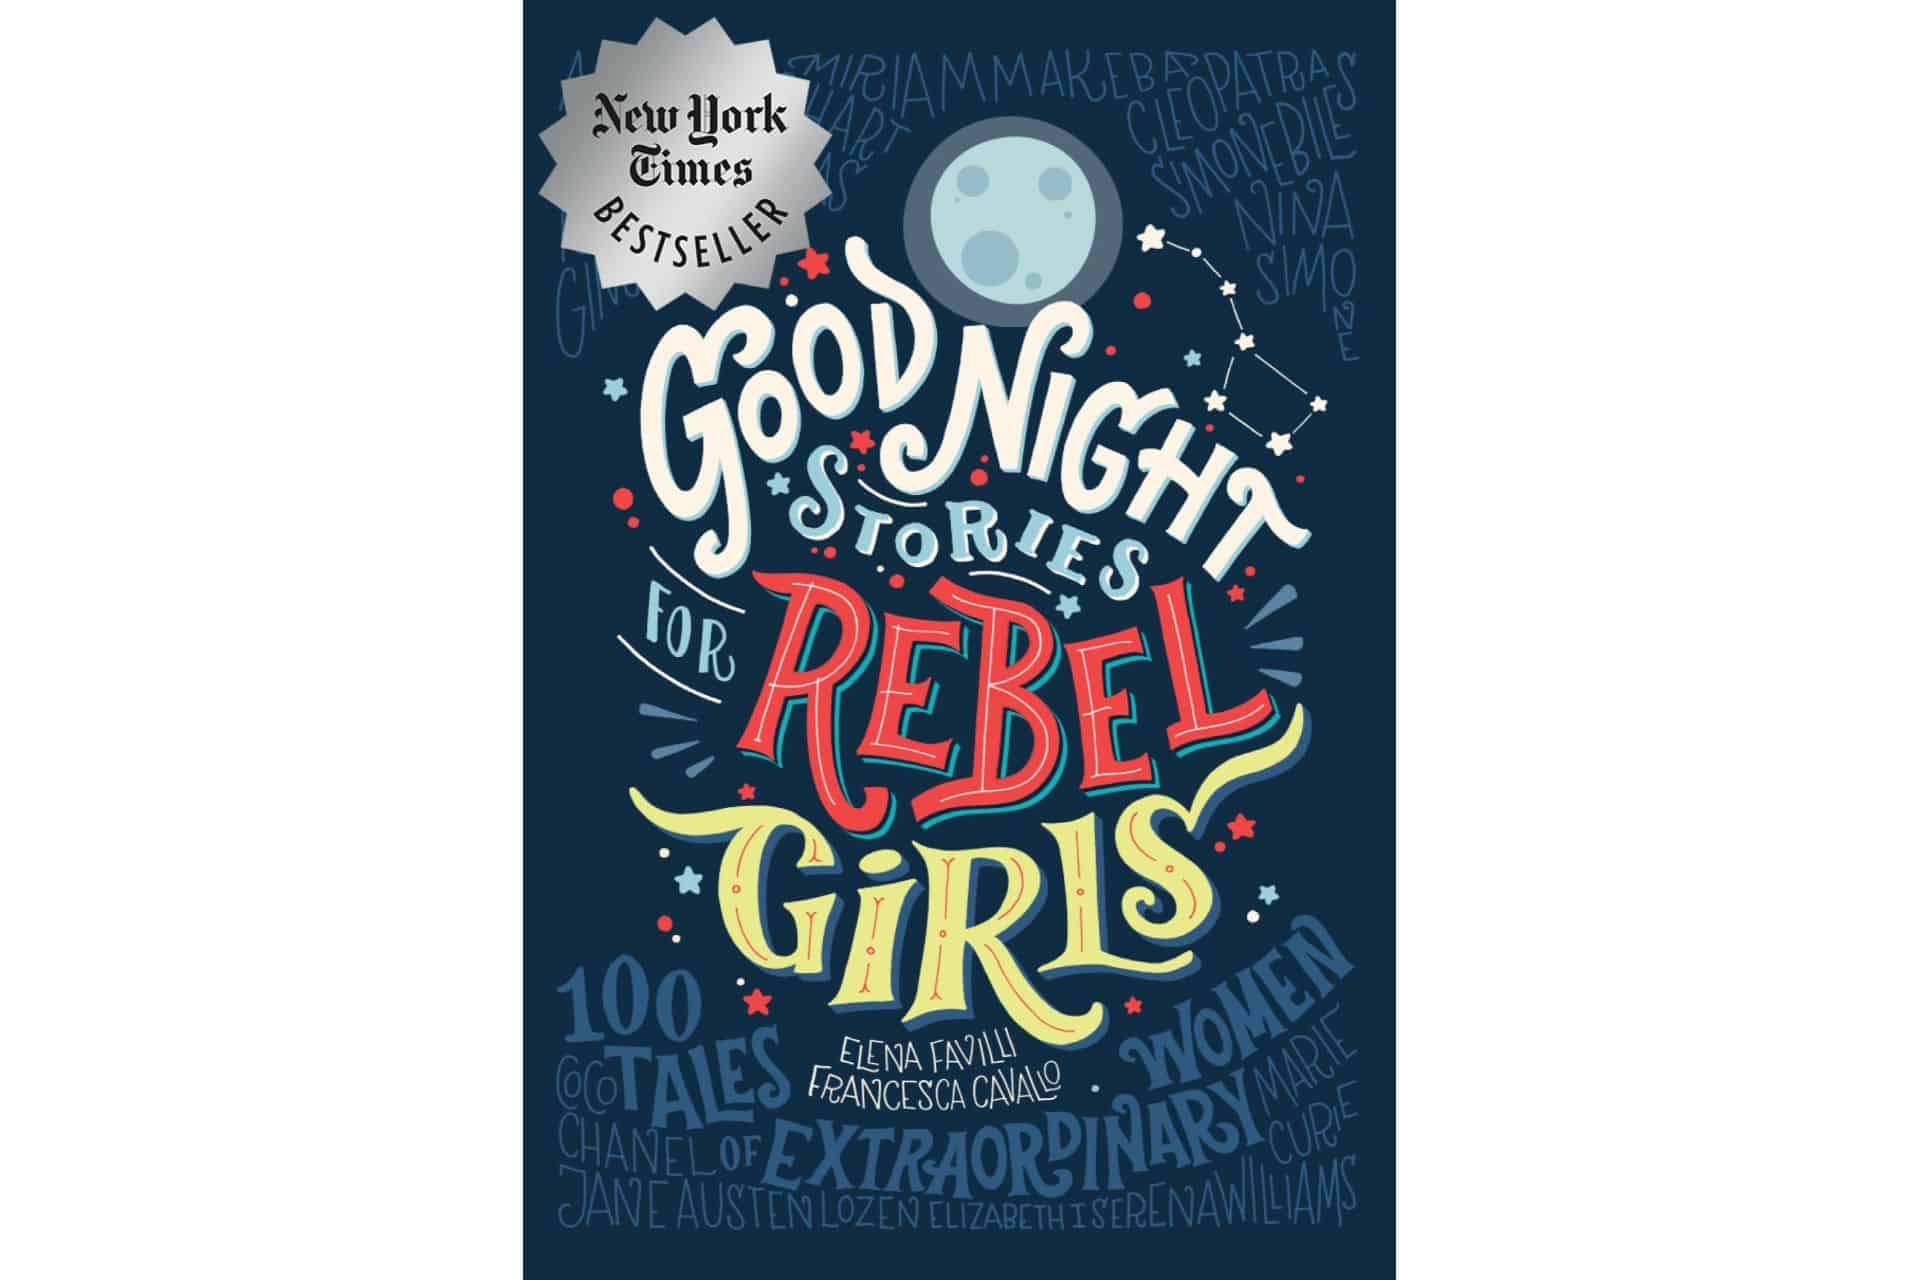 Goodnightstories - 14 books with strong female leads